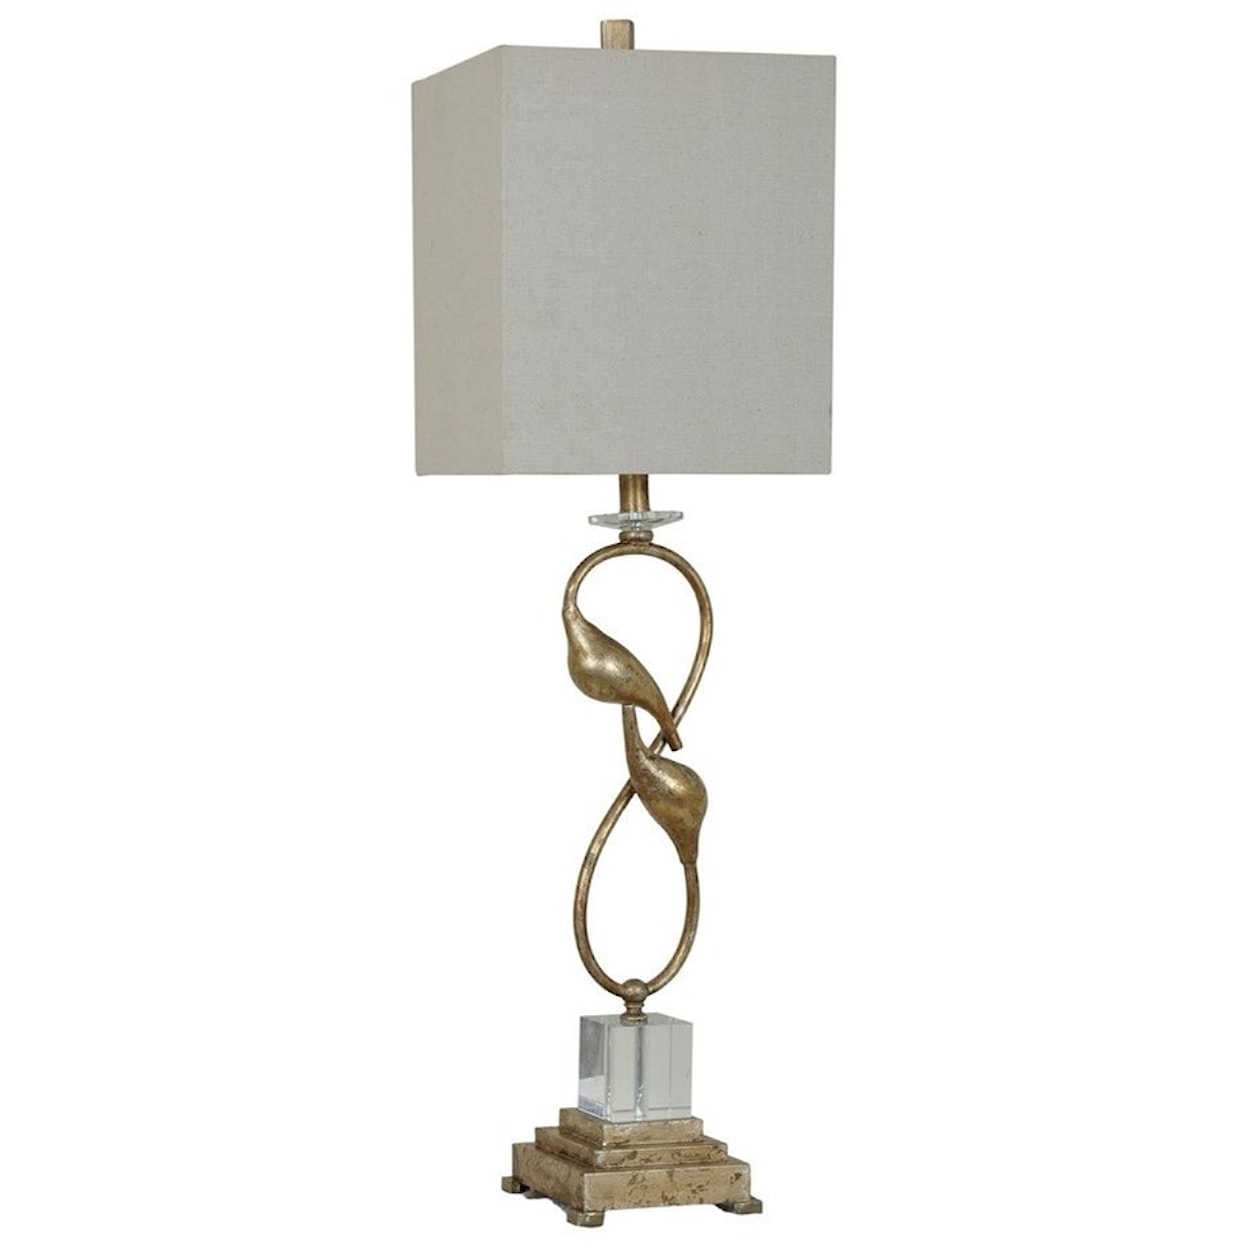 Crestview Collection Lighting Oi Connor Table Lamp